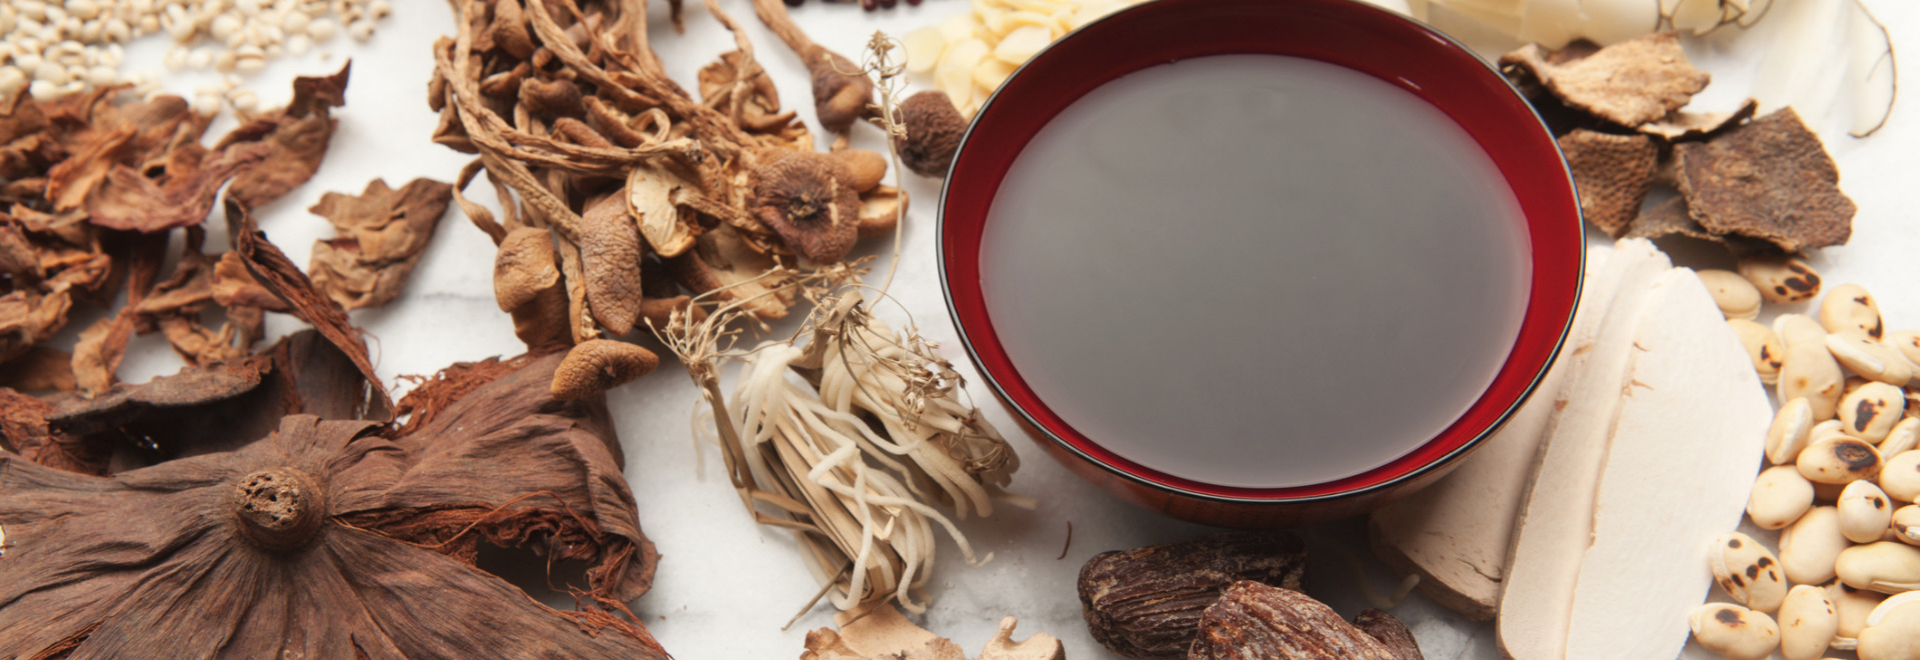 chinese-medicine-herbal-tea-benefits-side-effects